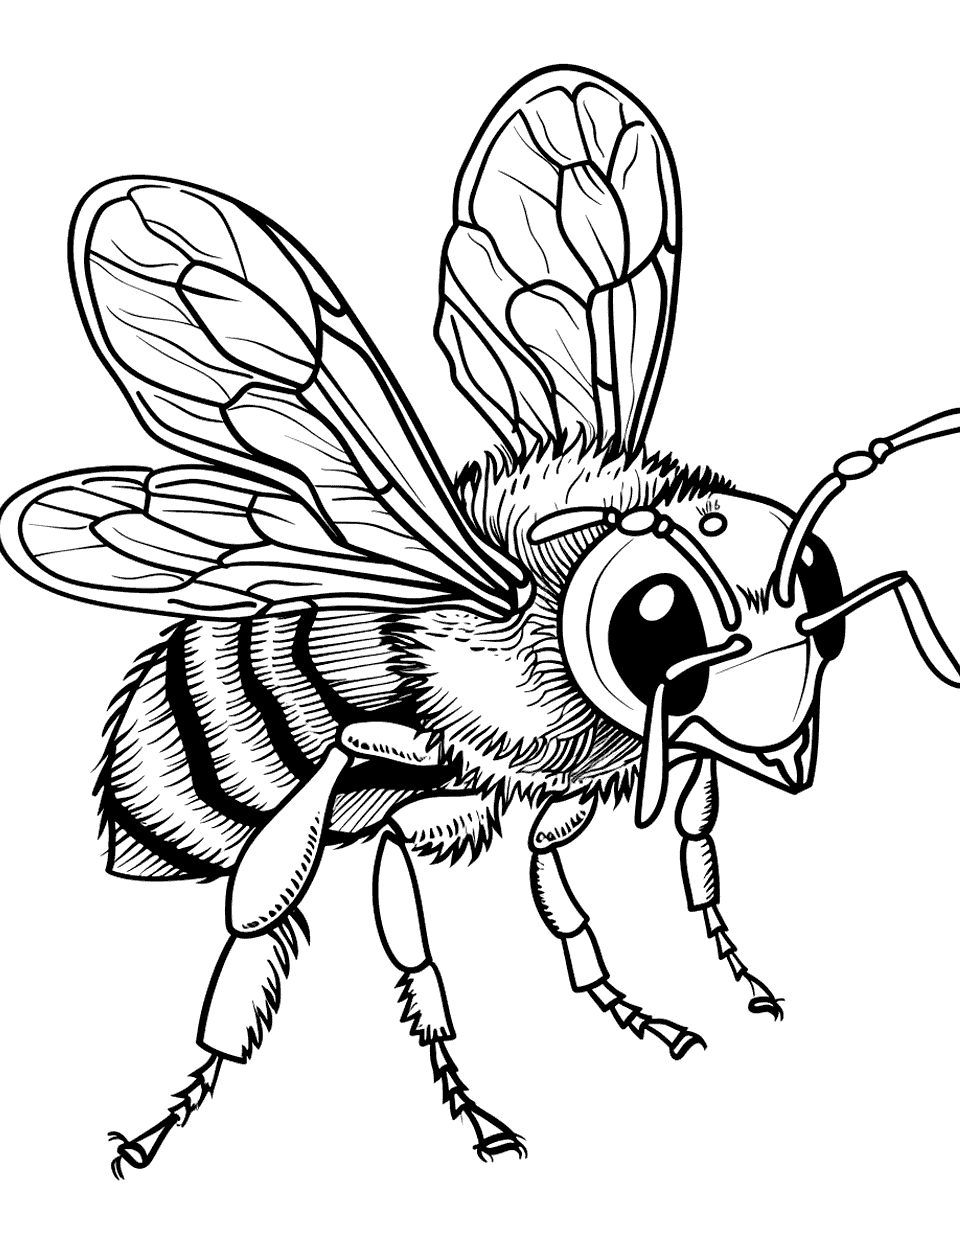 Killer Bee Alert Coloring Page - A solitary killer bee with an intense gaze, positioned as if protecting its territory.